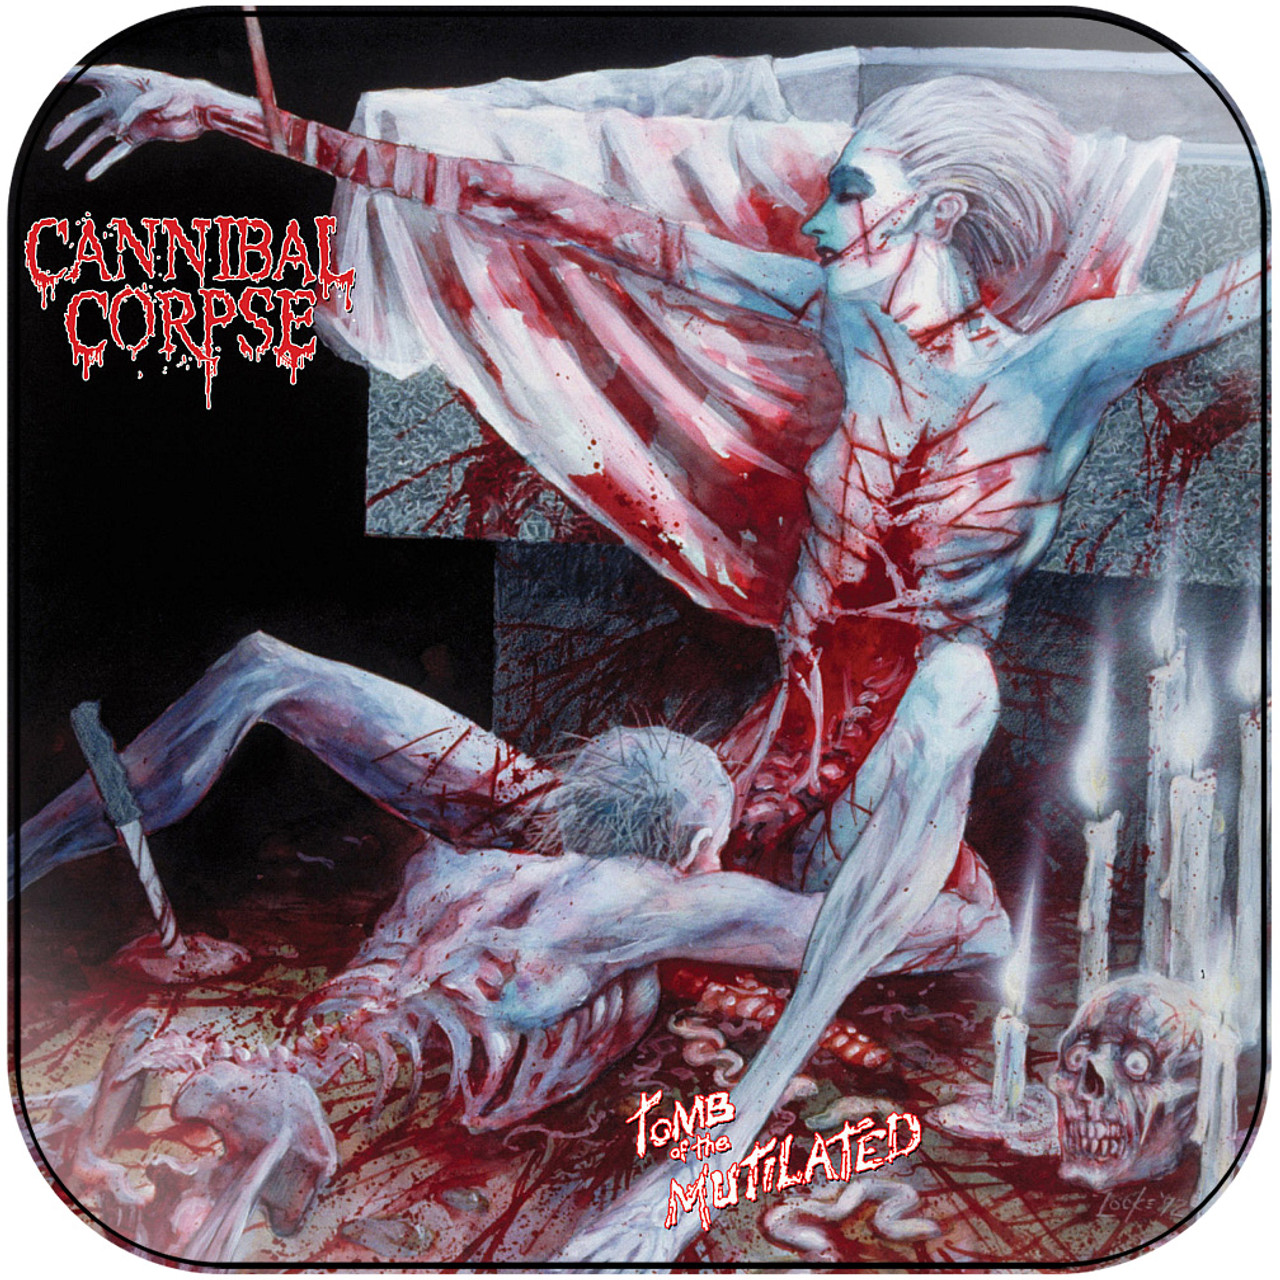 Cannibal Corpse Tomb Of The Mutilated-2 Album Cover Sticker Album